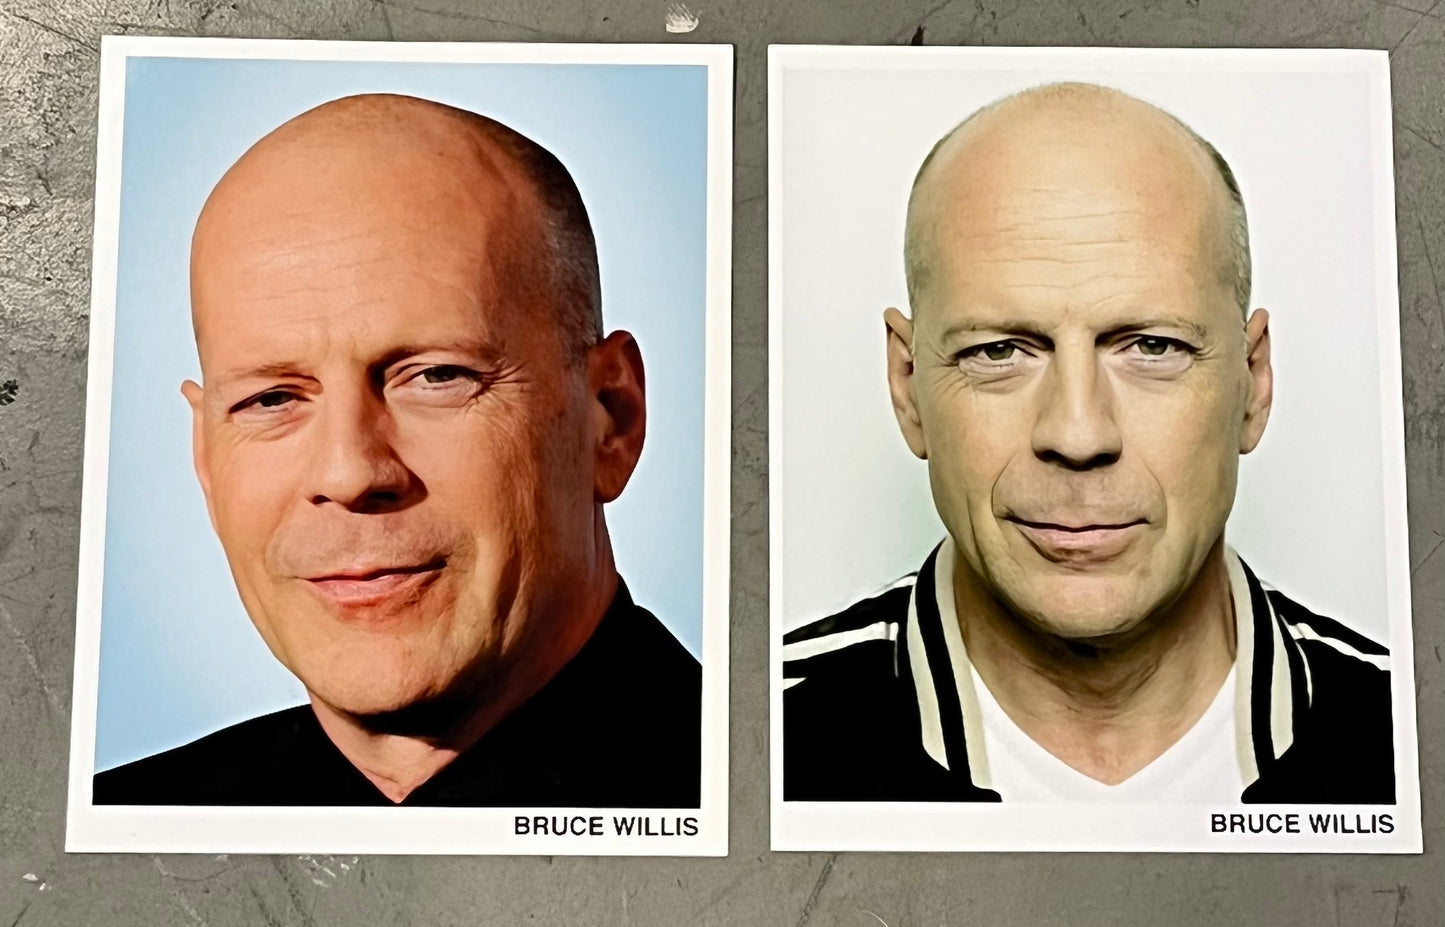 30 Rock: Bruce Willis Guest Host Photos to Frame (2)